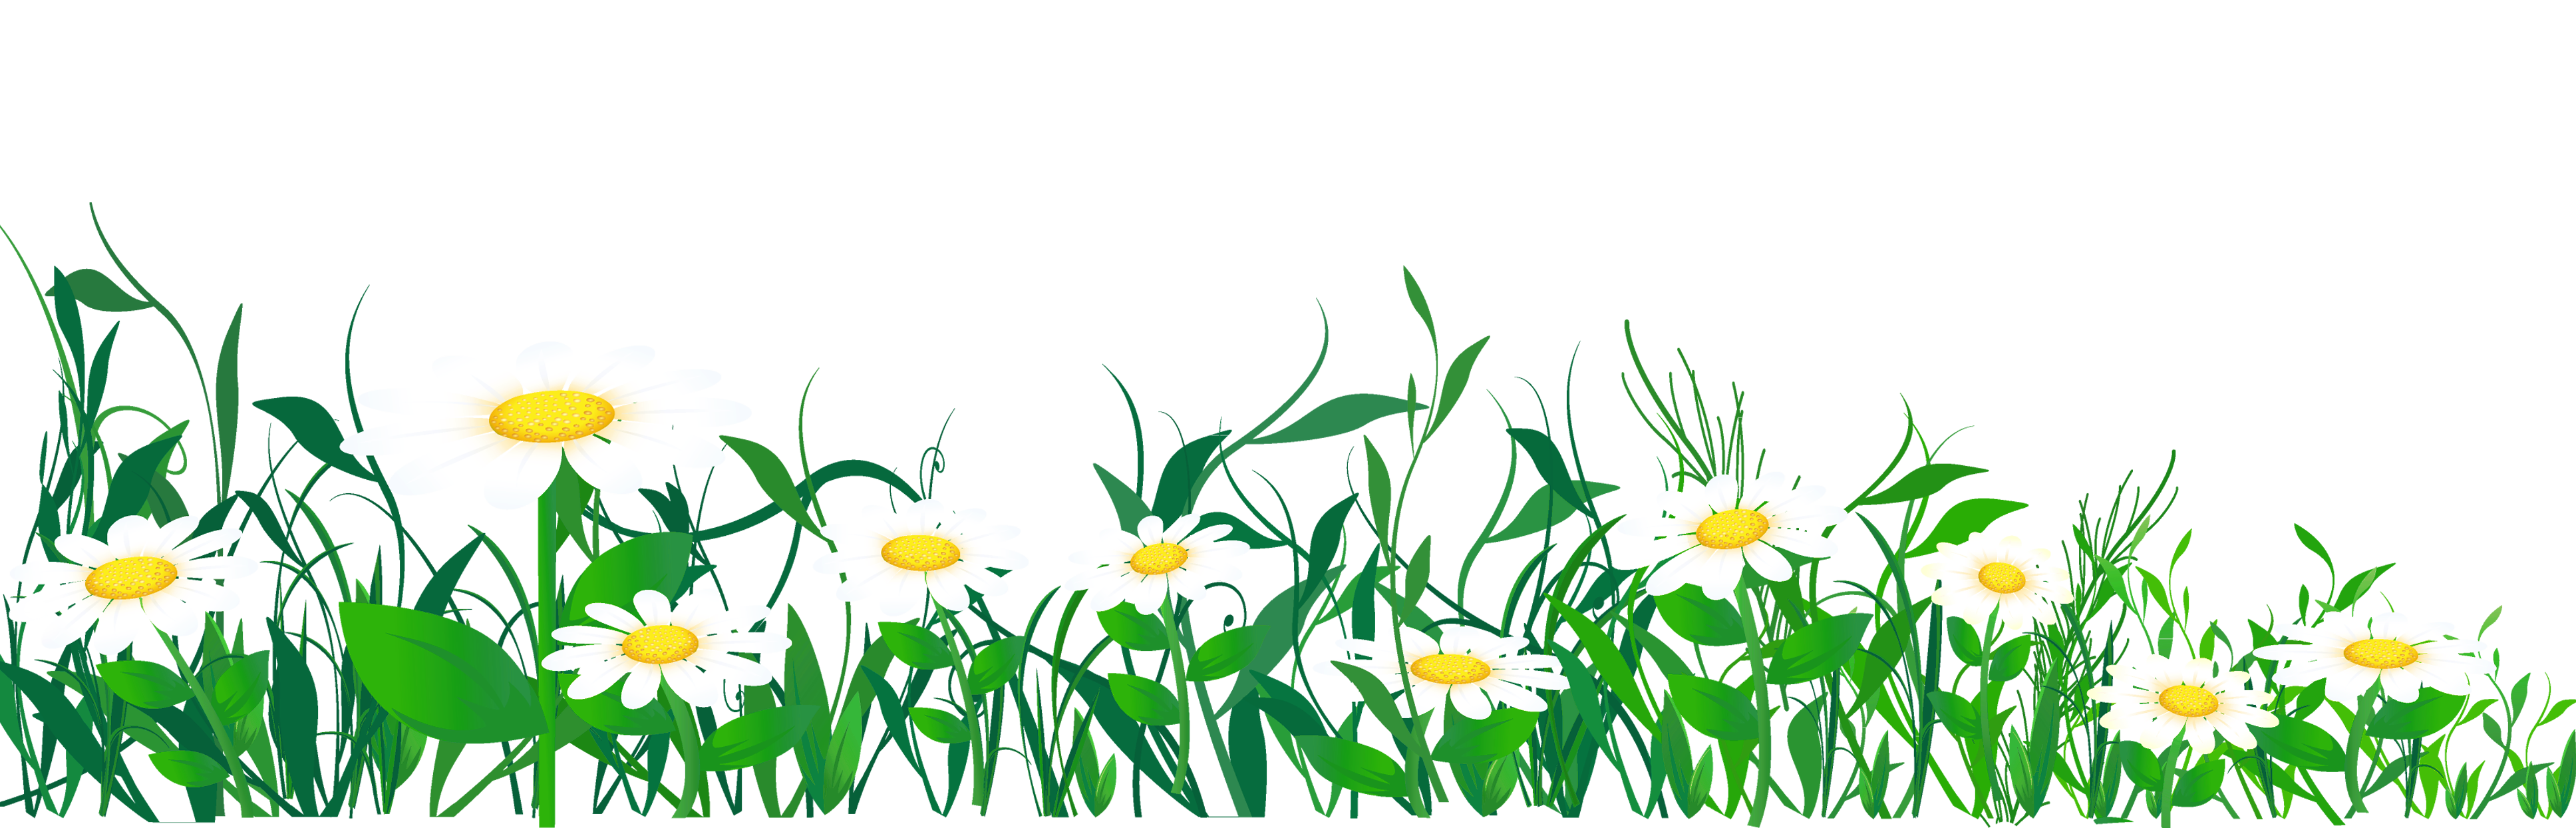 daisy clipart png - photo #29